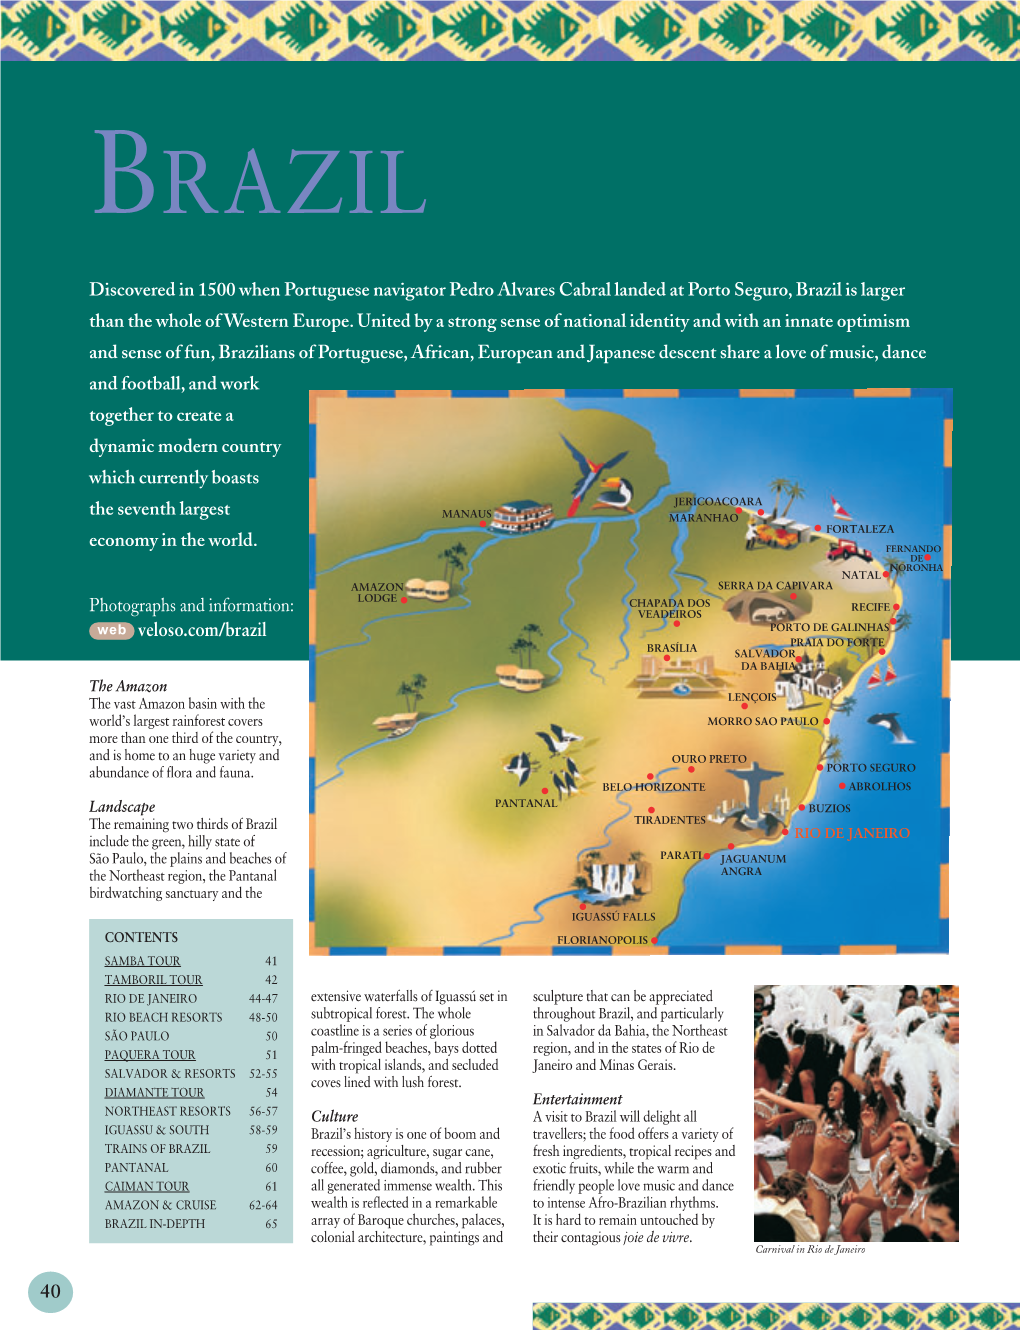 View Or Download Our Brazil Brochure